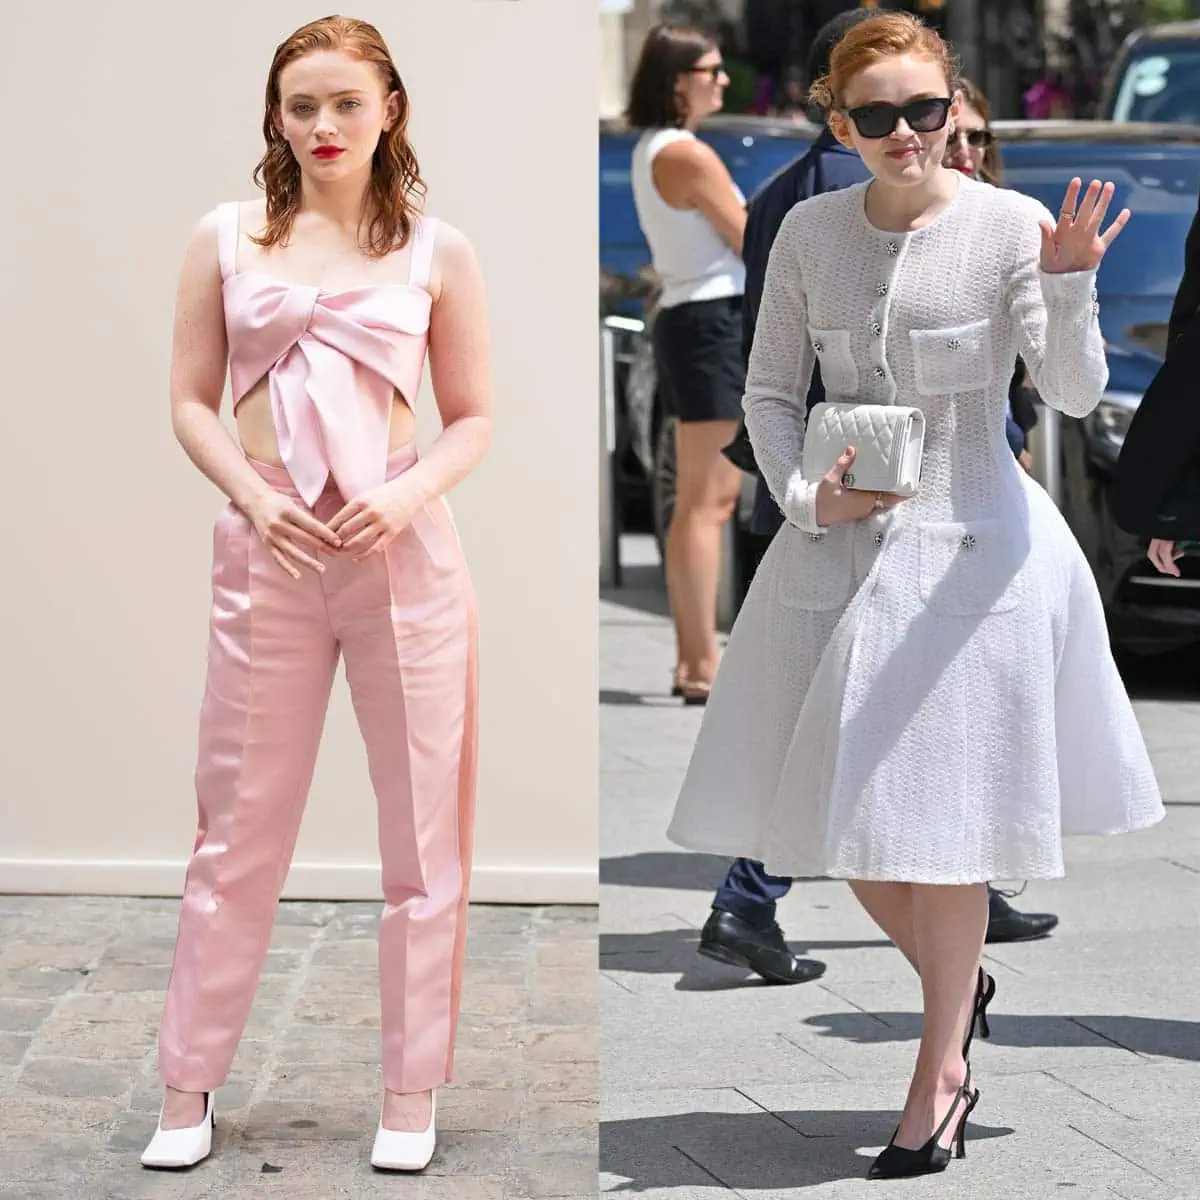 Sadie Sink displays her elegant and youthful style sense in two outfits during Paris Fashion Week: a two-piece pink satin ensemble and a white A-line dress